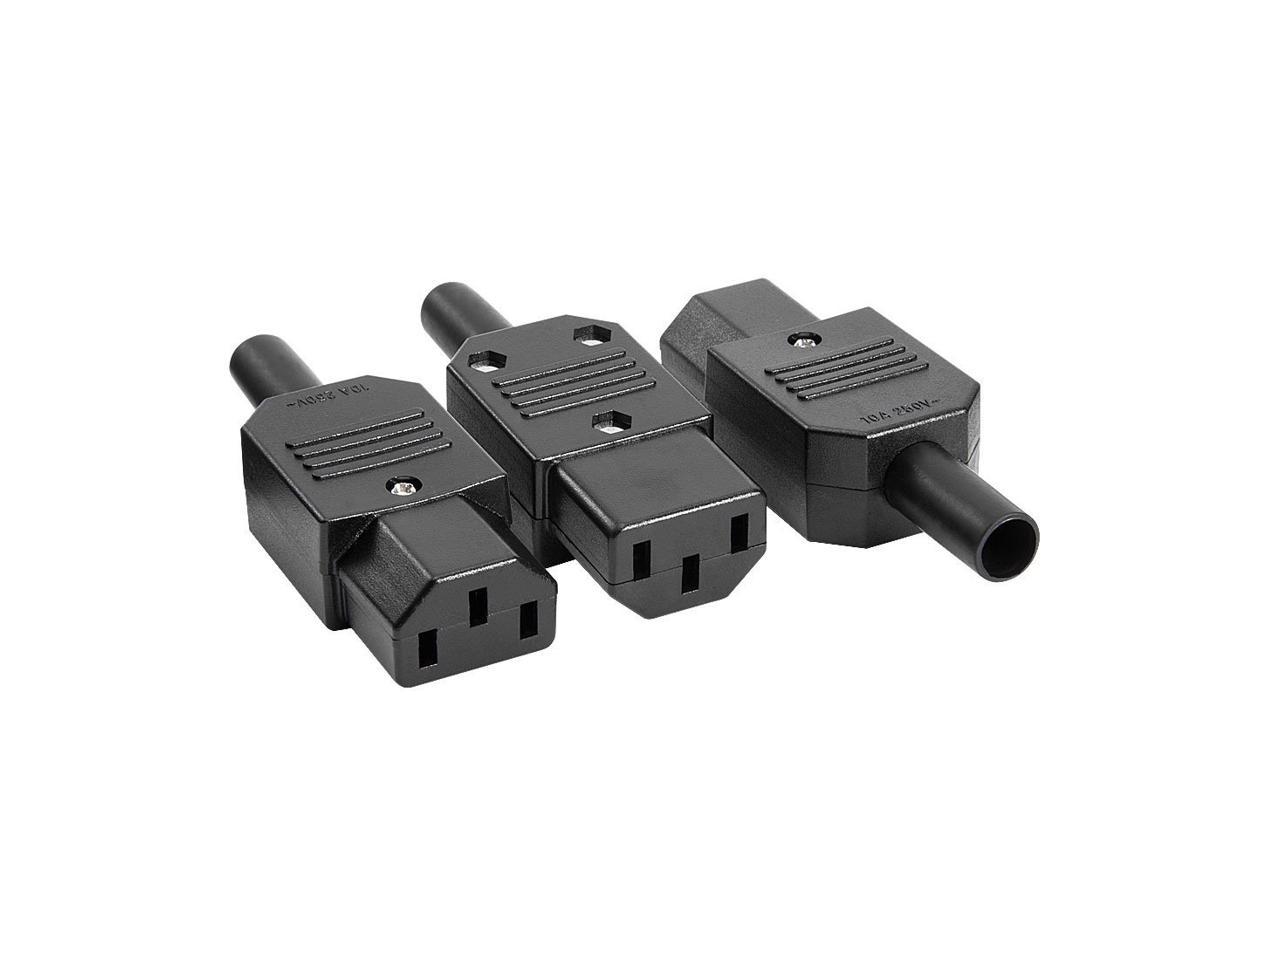 Details about   IEC 320 C14 Male Plug to C13 Female Socket  Power Connector Adapter AC 250V 10A 